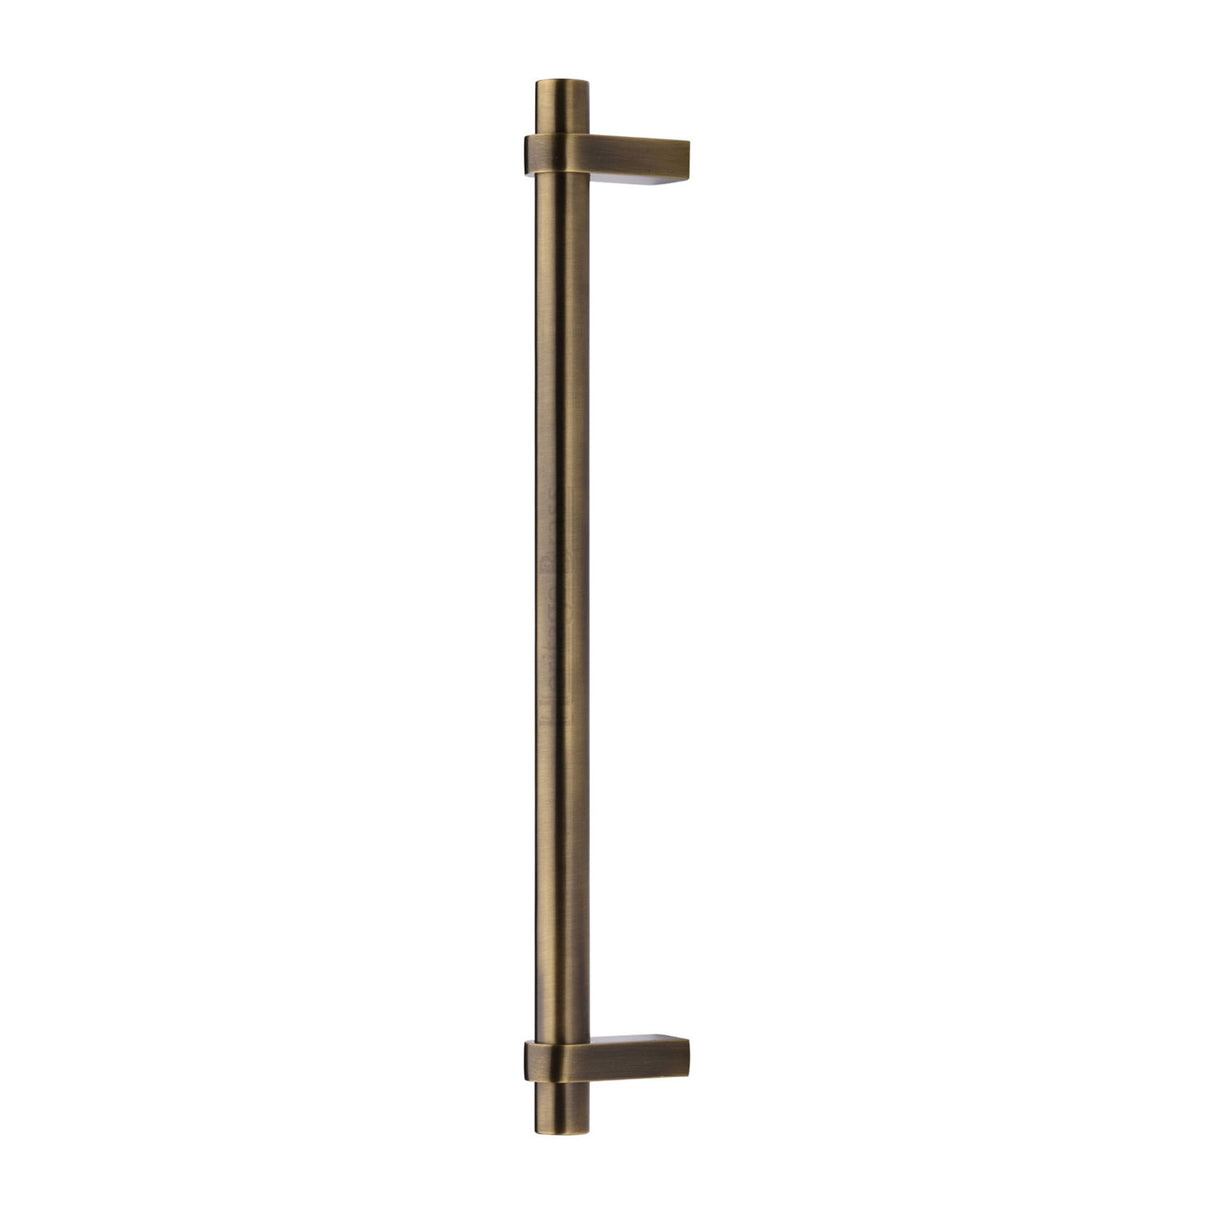 This is an image of a Heritage Brass - Door Pull Handle Industrial Design 353mm Antique Brass Finish, v2485-353-at that is available to order from Trade Door Handles in Kendal.